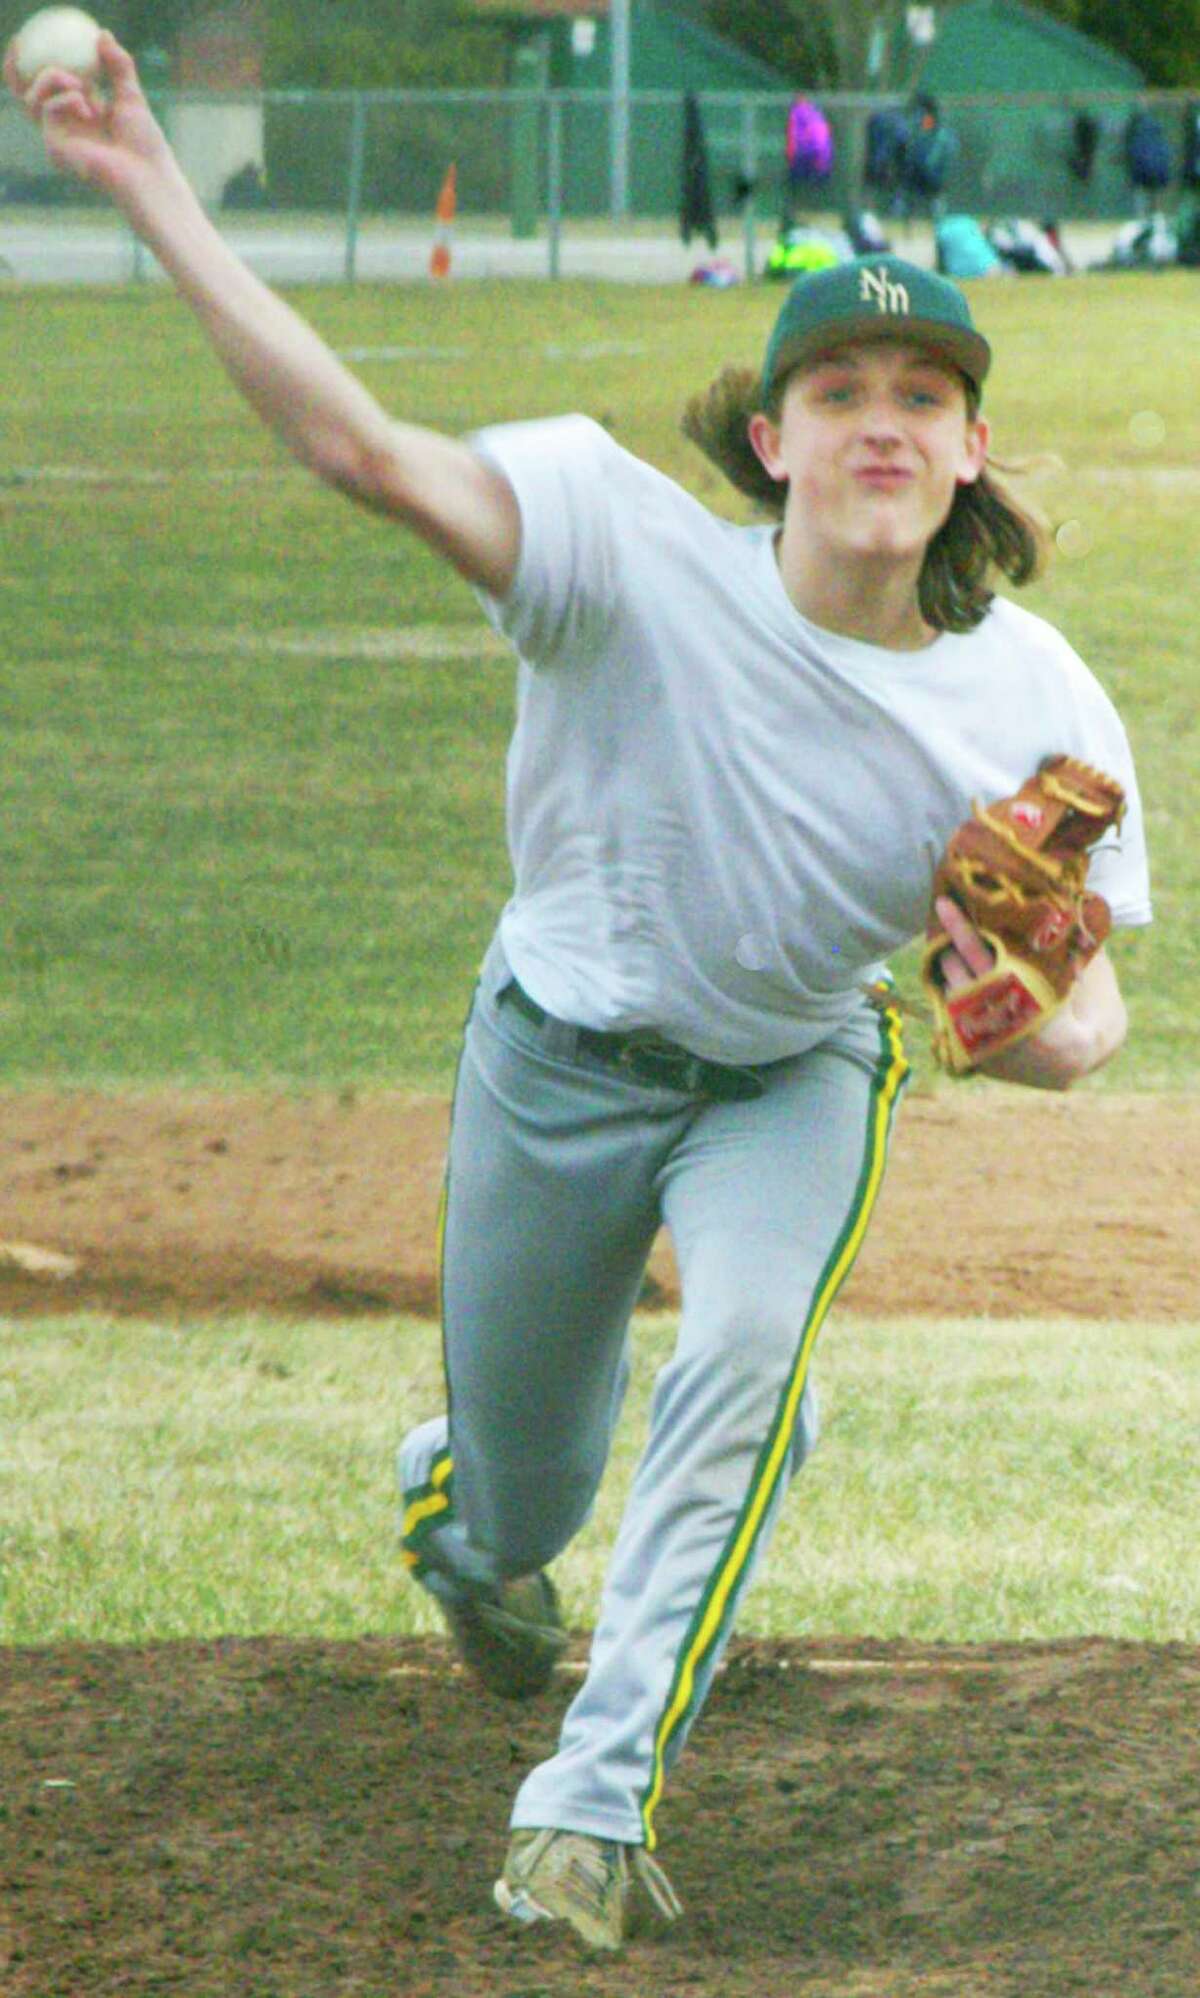 Play ball! Warmer temperatures and the reality that opening day was just a week away sparked a surge in energy for spring sports teams prepping this week at New Milford and Shepaug Valley High School for their 2014 seasons. Above, pitching hopeful Cooper Knight, minus his Green Wave jersey but otherwise very much into the task at hand, fires a pitch during a scrimmage against Sacred Heart of Waterbury at NMHS. Nine New Milford High varsity teams and seven more at Shepaug will compete for respective laurels in the South-West Conference and Berkshire League. For previews of all the teams, including rosters, schedule and plenty of photos, see the April 11 and 18 editions of the Spectrum and visit www.newmilfordspectrum.com.